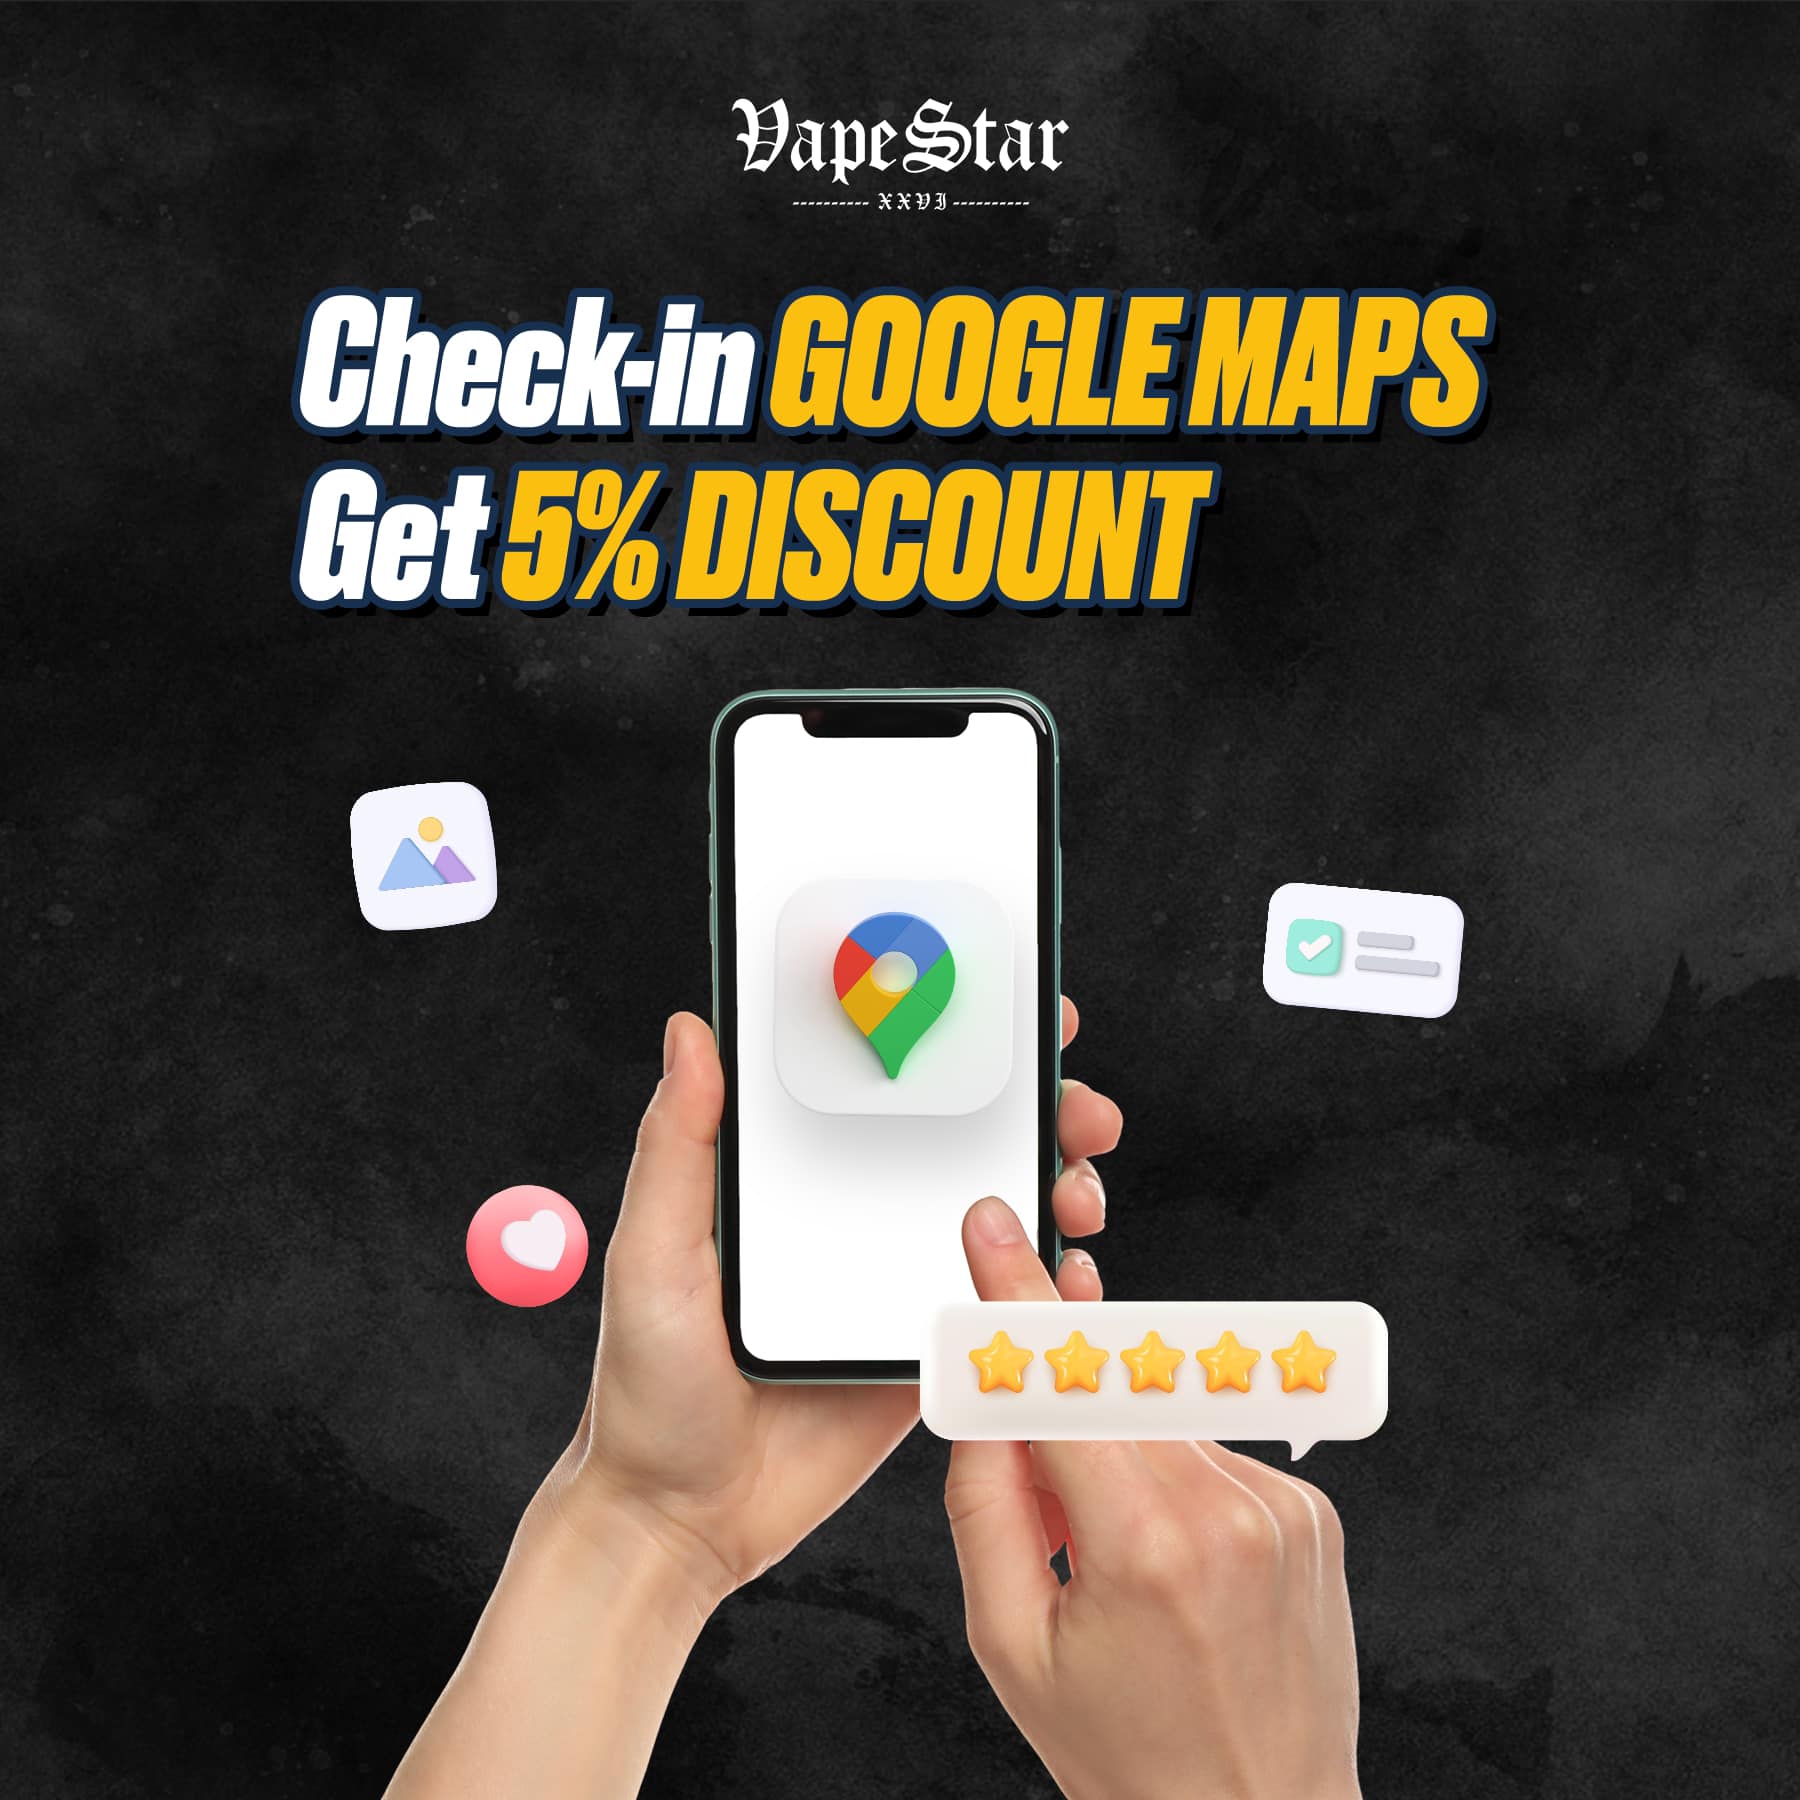 Check in Google map - Get 5% discount